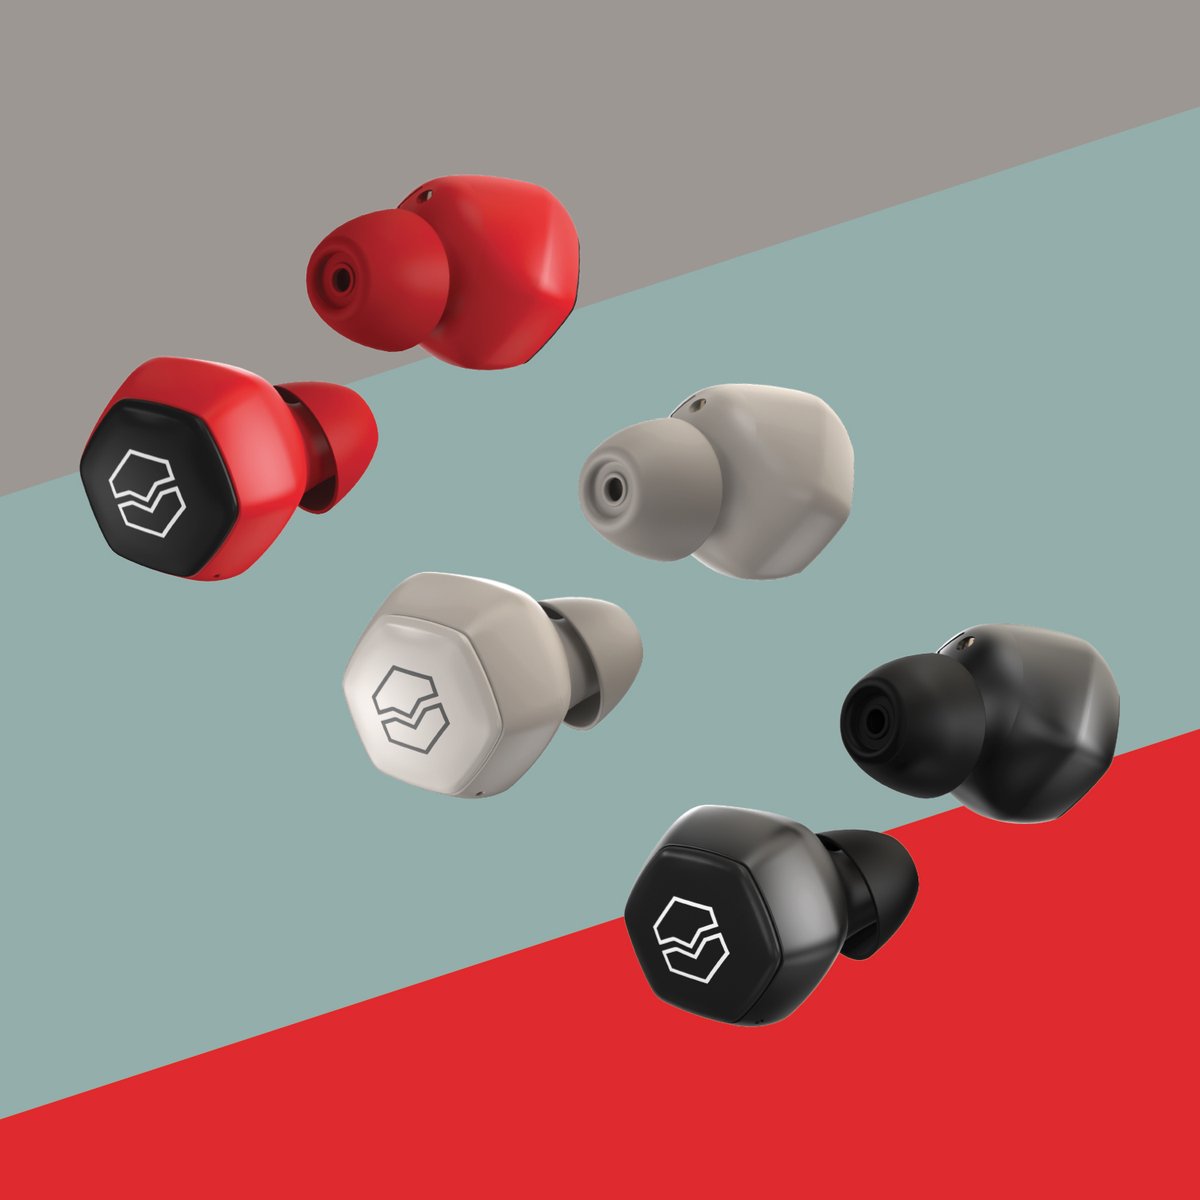 Set the mood with Hexamove Lite's impeccable sound and bold new colors. Are you a cool Sand White, a classic Black, or do you see Red when the right beat drops? 🎧: v-moda.com/hexamove-lite